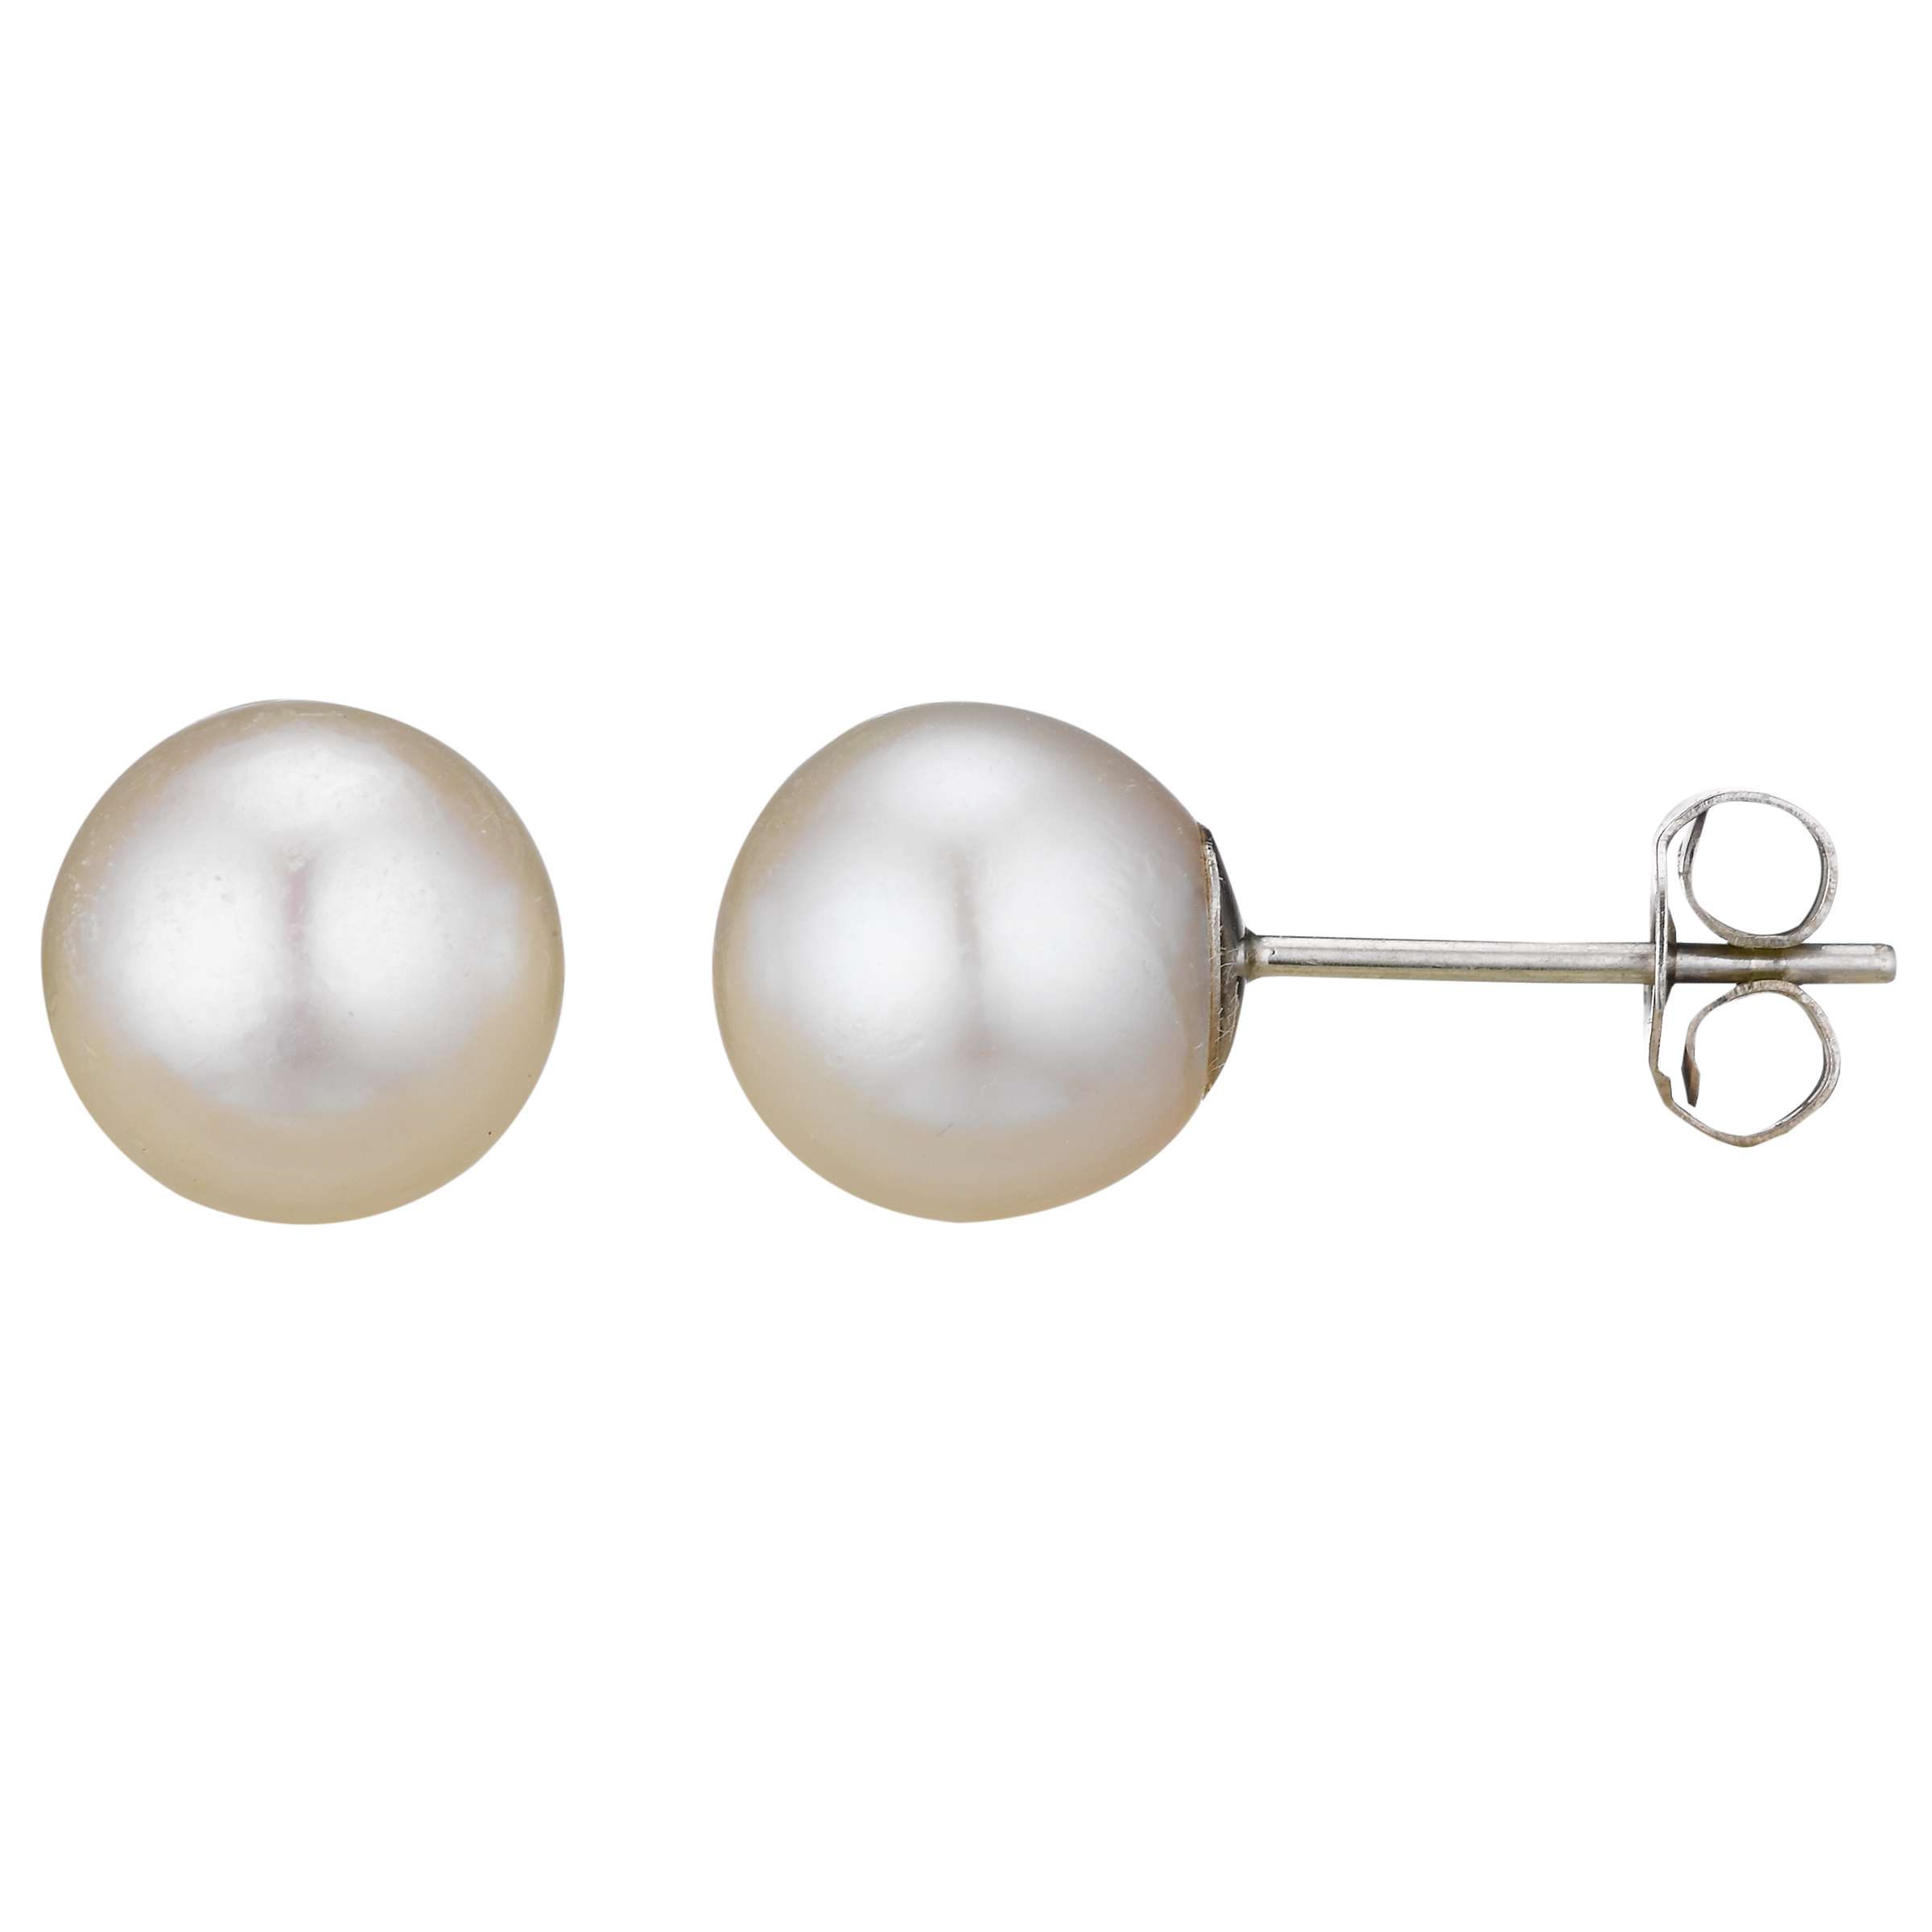 Buy A B Davis 18ct White Gold Round Pearl Stud Earrings, White Online at johnlewis.com